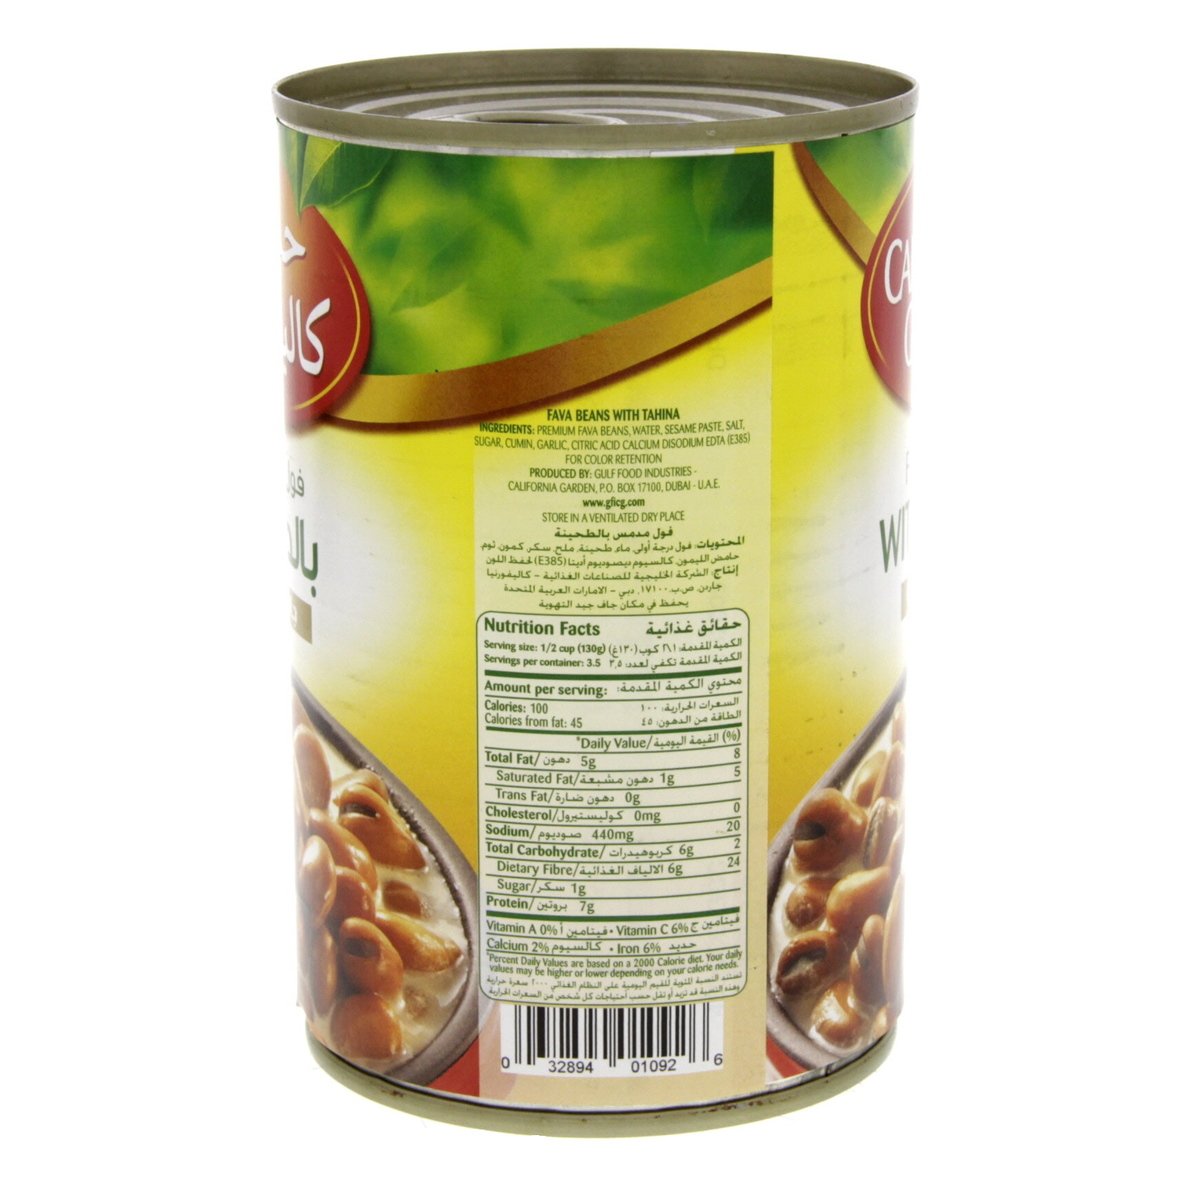 California Garden Canned Fava Beans With Tahina 450 g